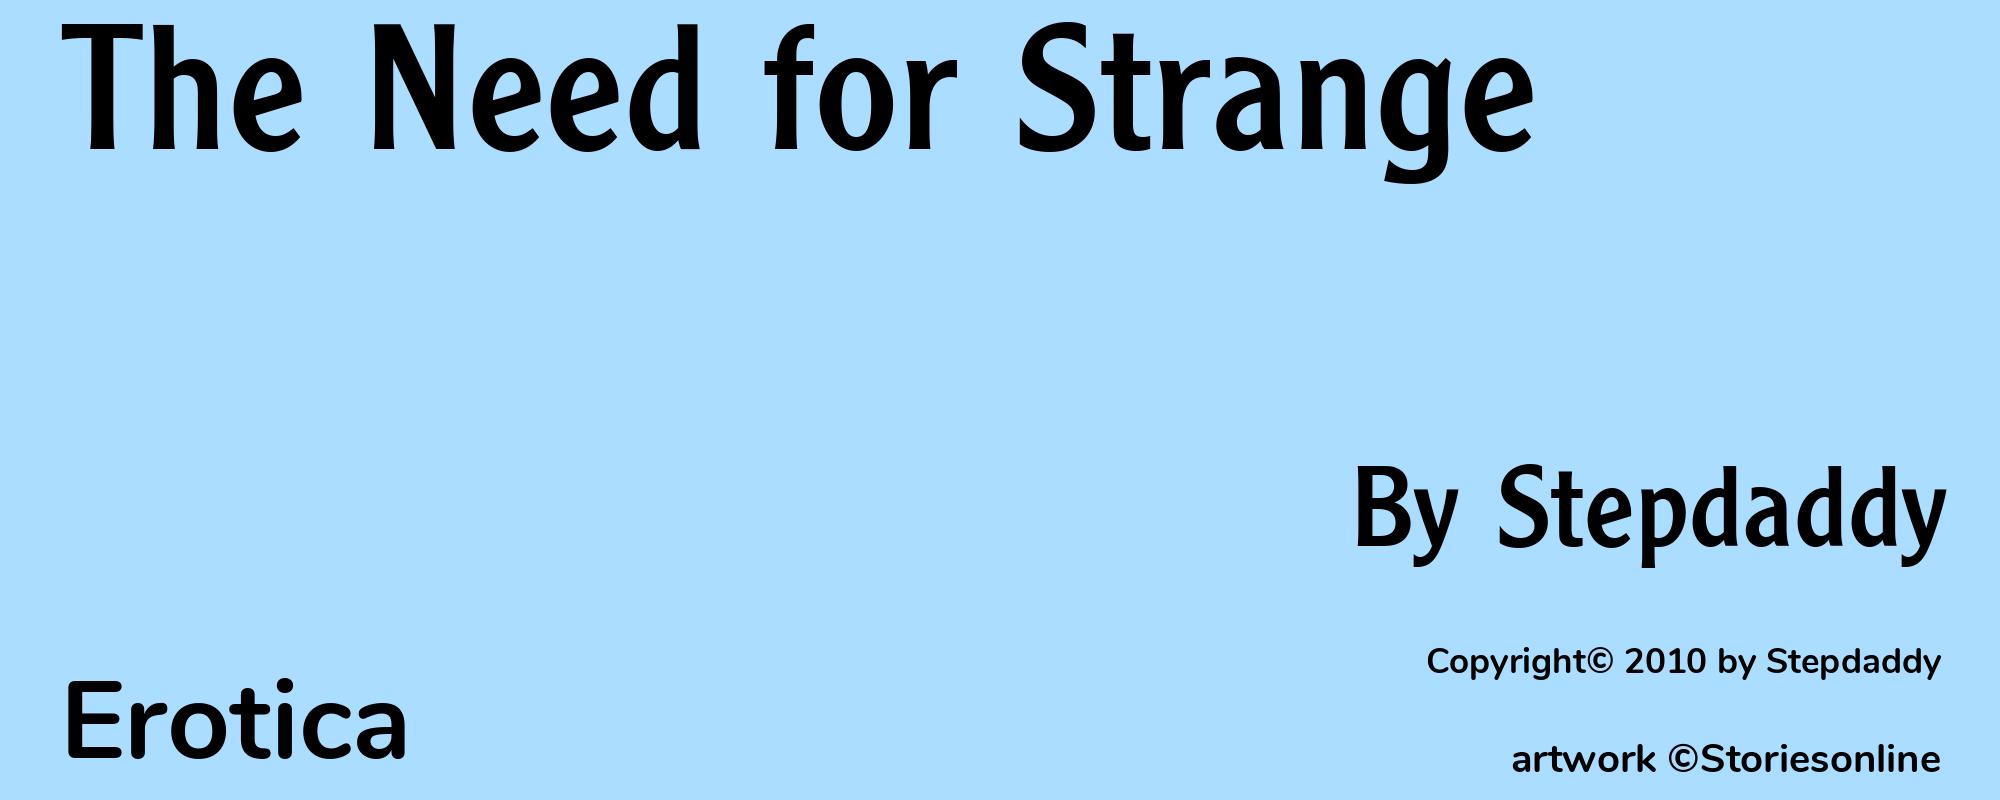 The Need for Strange - Cover